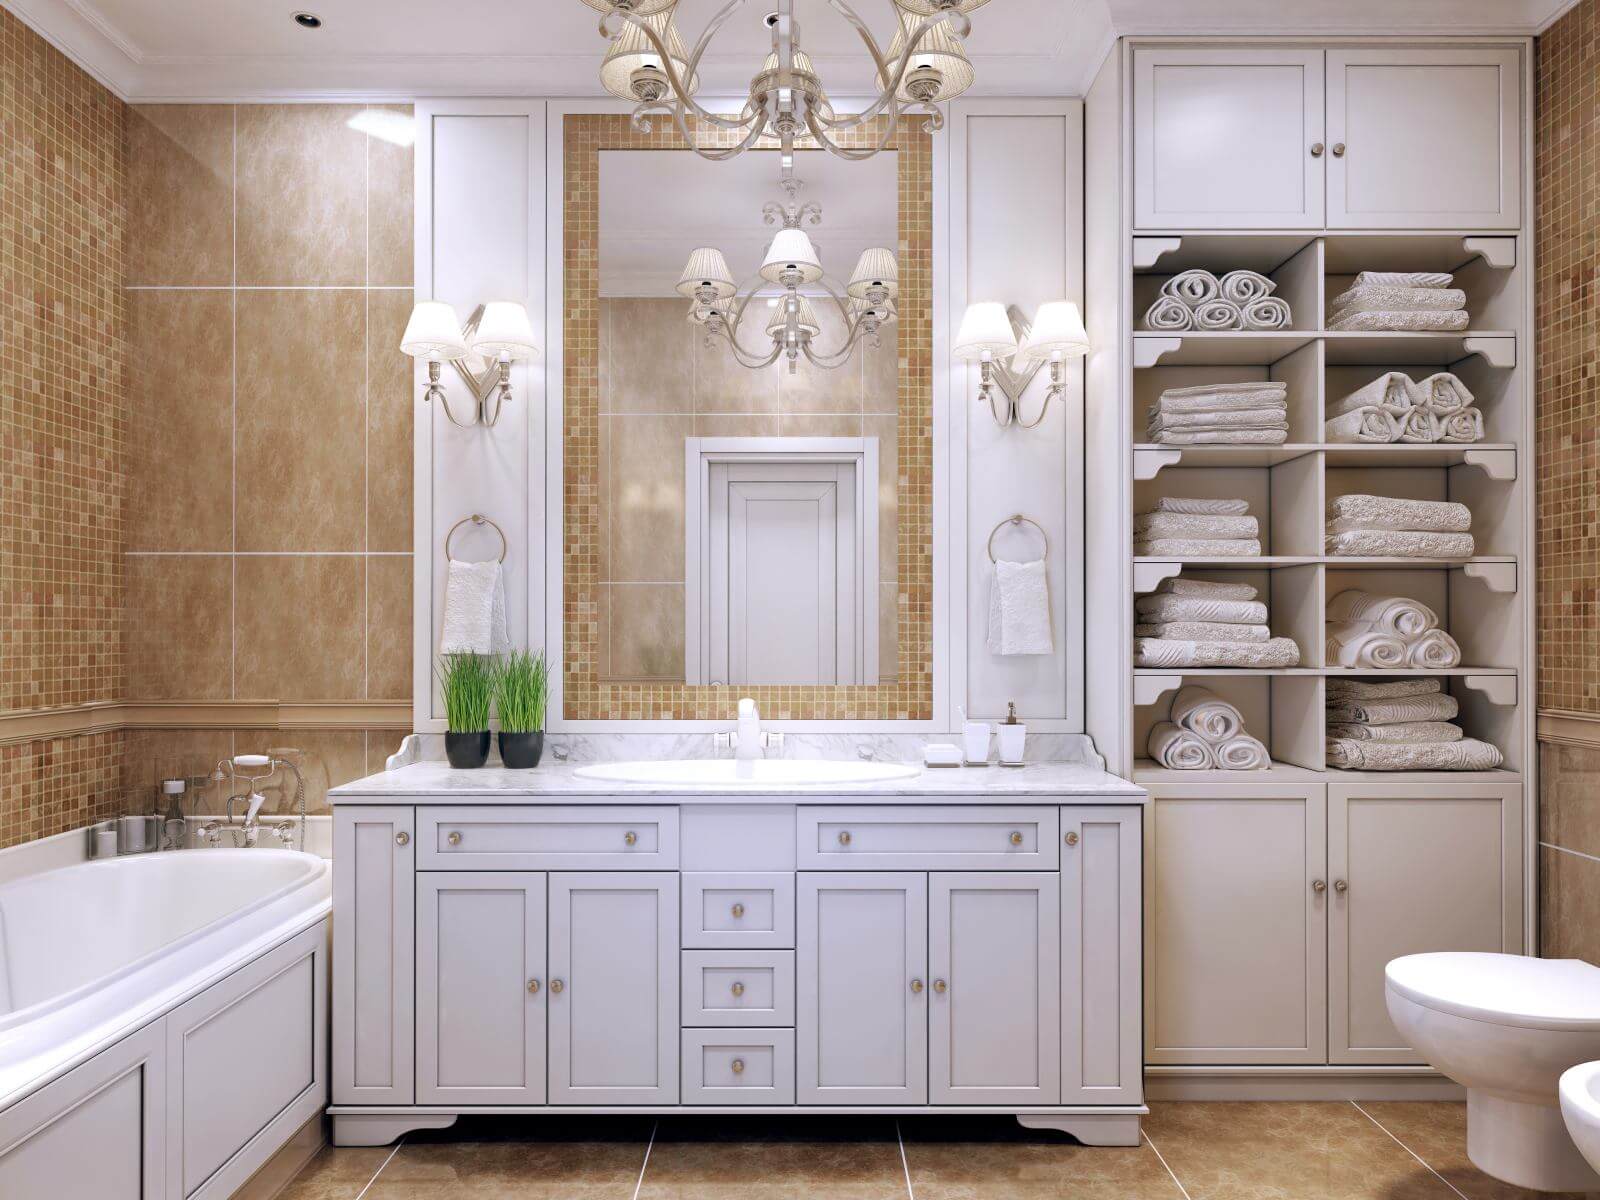 Furniture in classic bathroom. Cream colored bathroom with white furniture, great mirror with sconces and luxurious chandelier. Pleasing to the eye contrast of two colors. 3D render